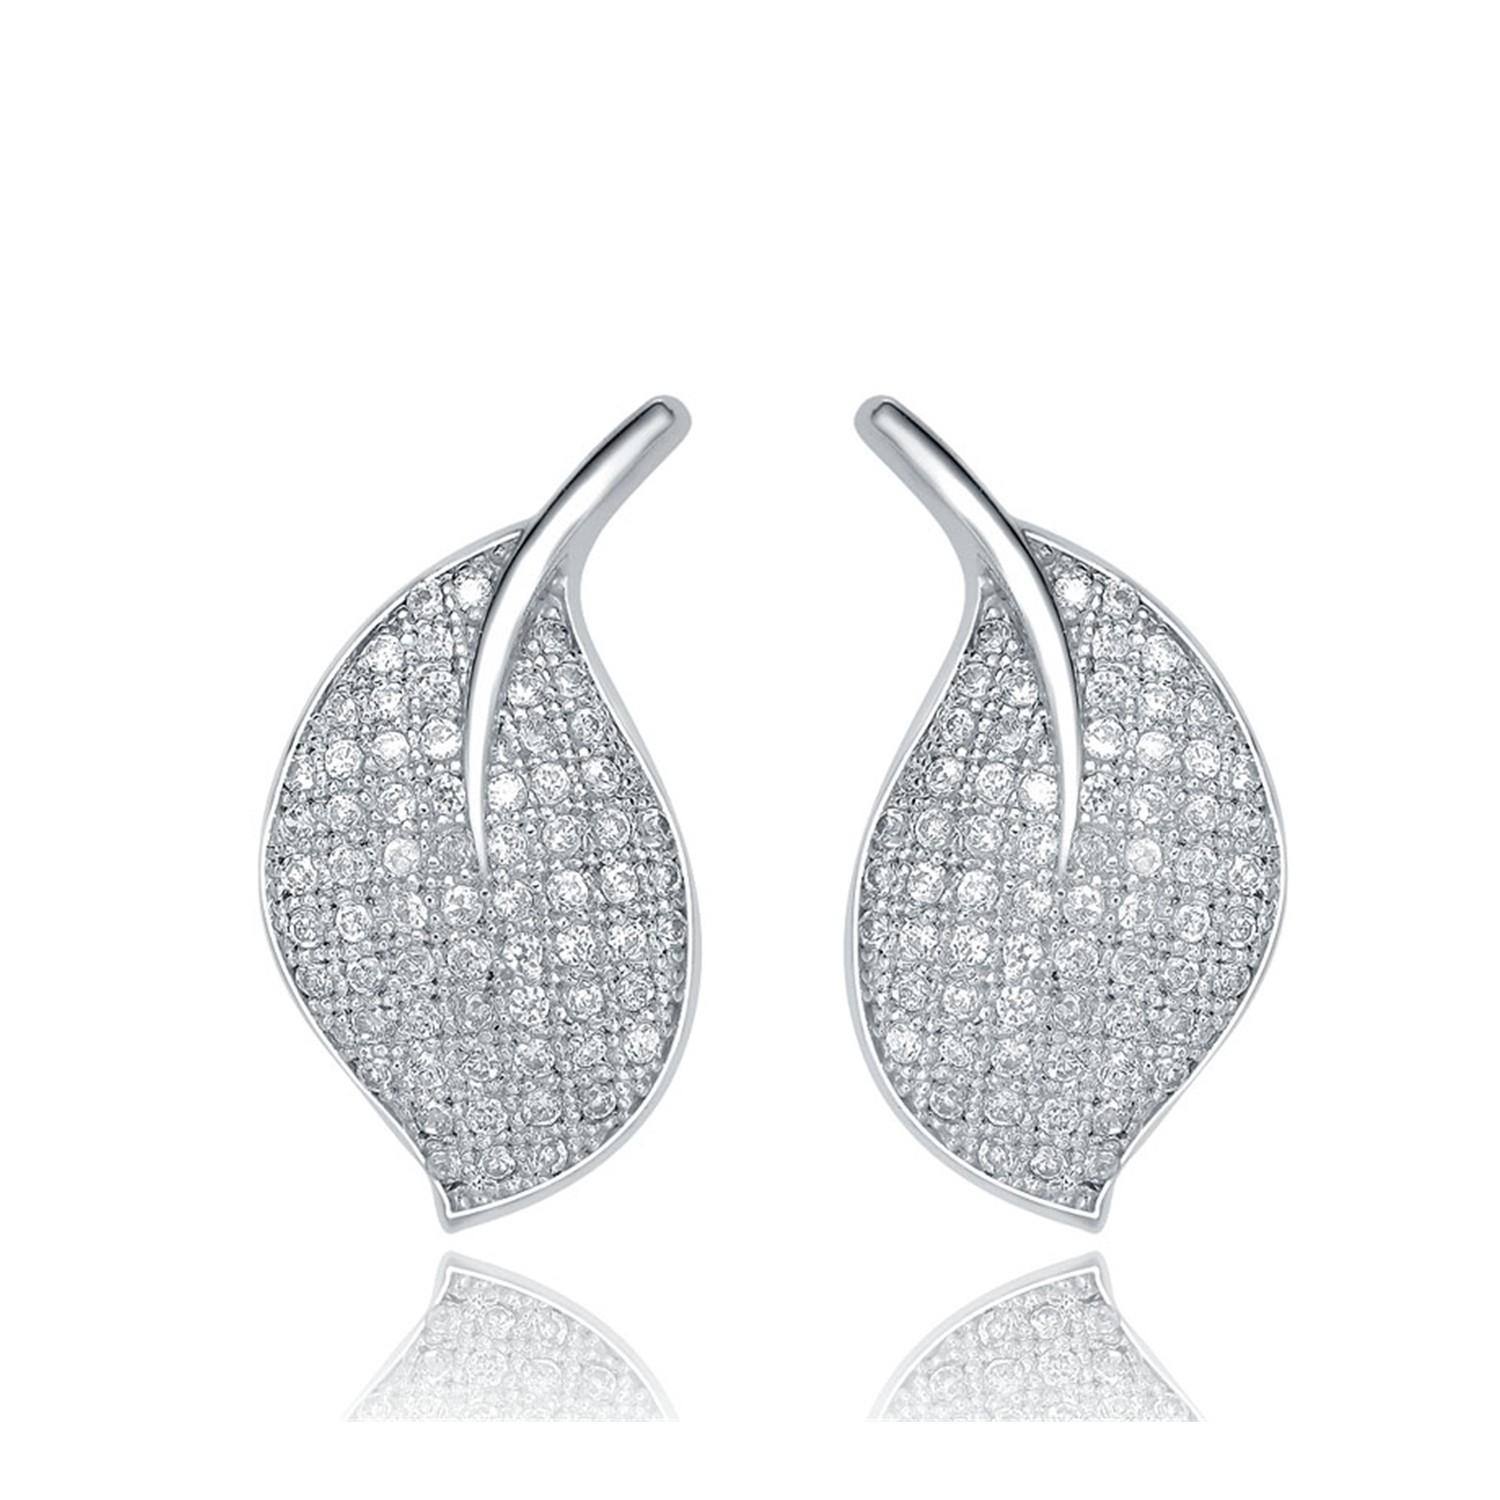 New Fashion Couple Leaves Earring Bling CZ 925 Sterling Sliver Women Earring Leaves Stud Jewelry